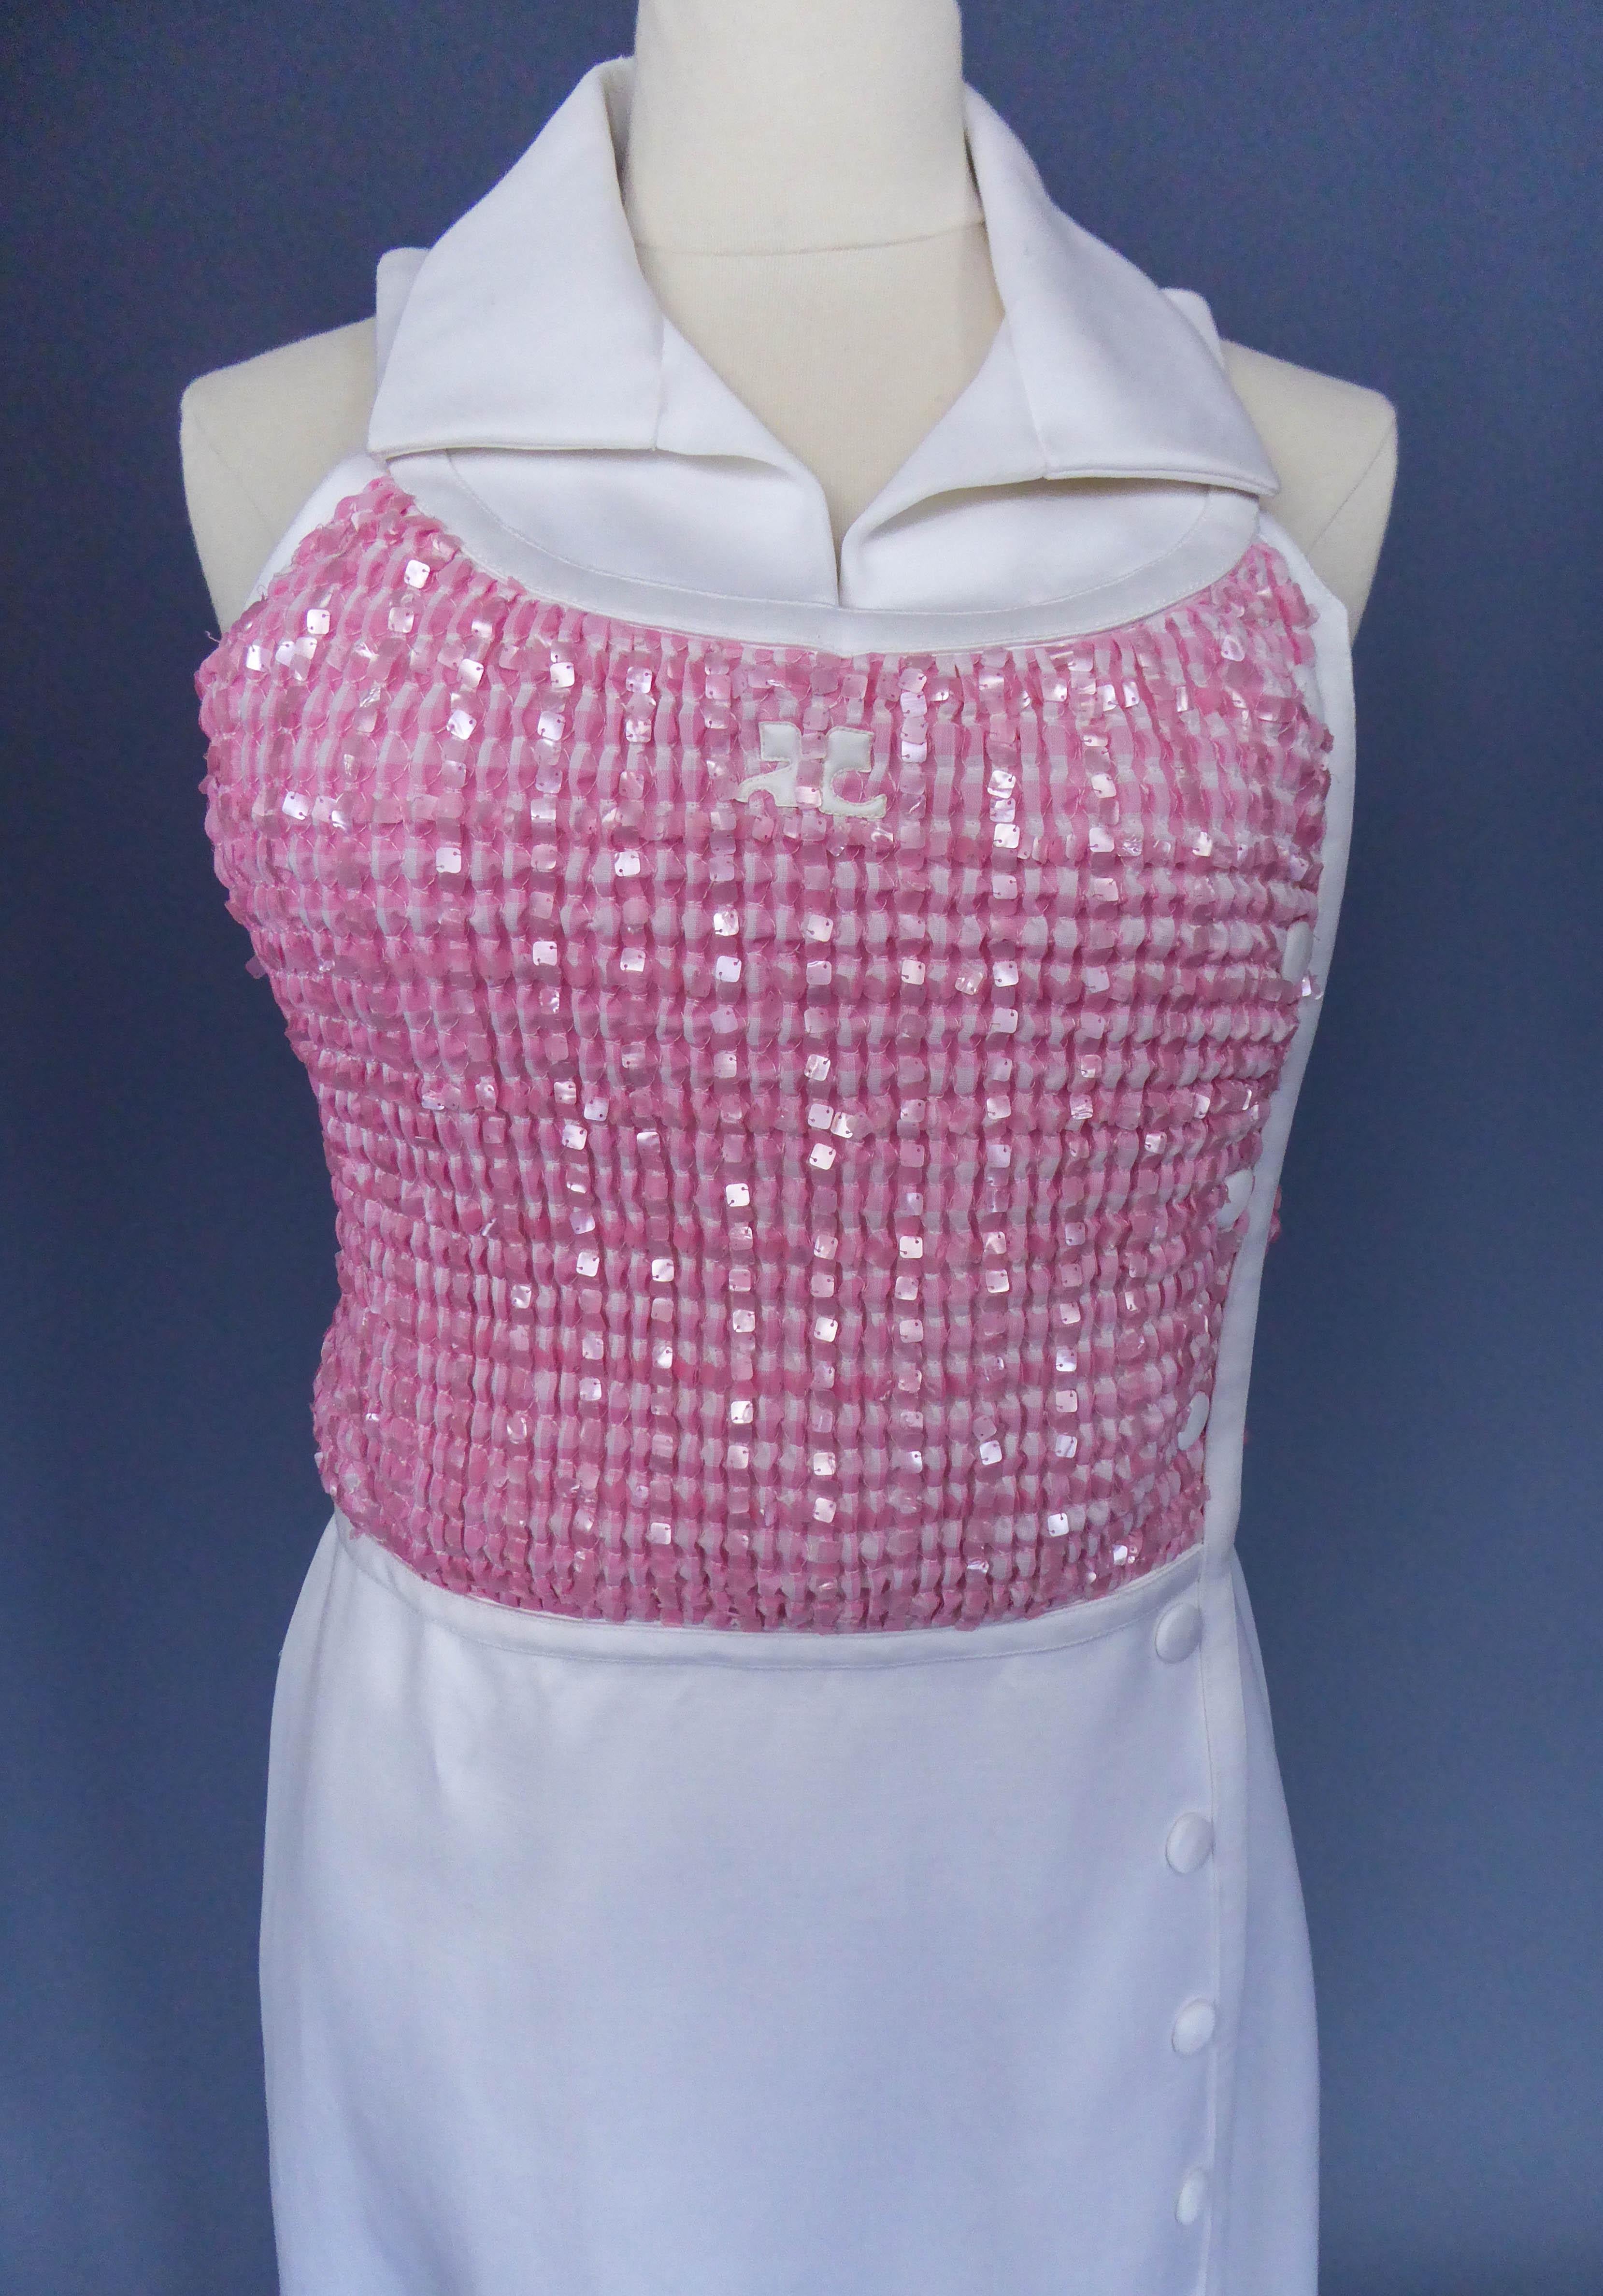 Circa 1970/1980
France

Long dress in white cotton jersey and pink sequins embroidery by André Courrèges Couture from the 1970s. Sleeveless dress in thick ecru jersey underlined with a matching overstitched band. Bustier in checkered pink gingham